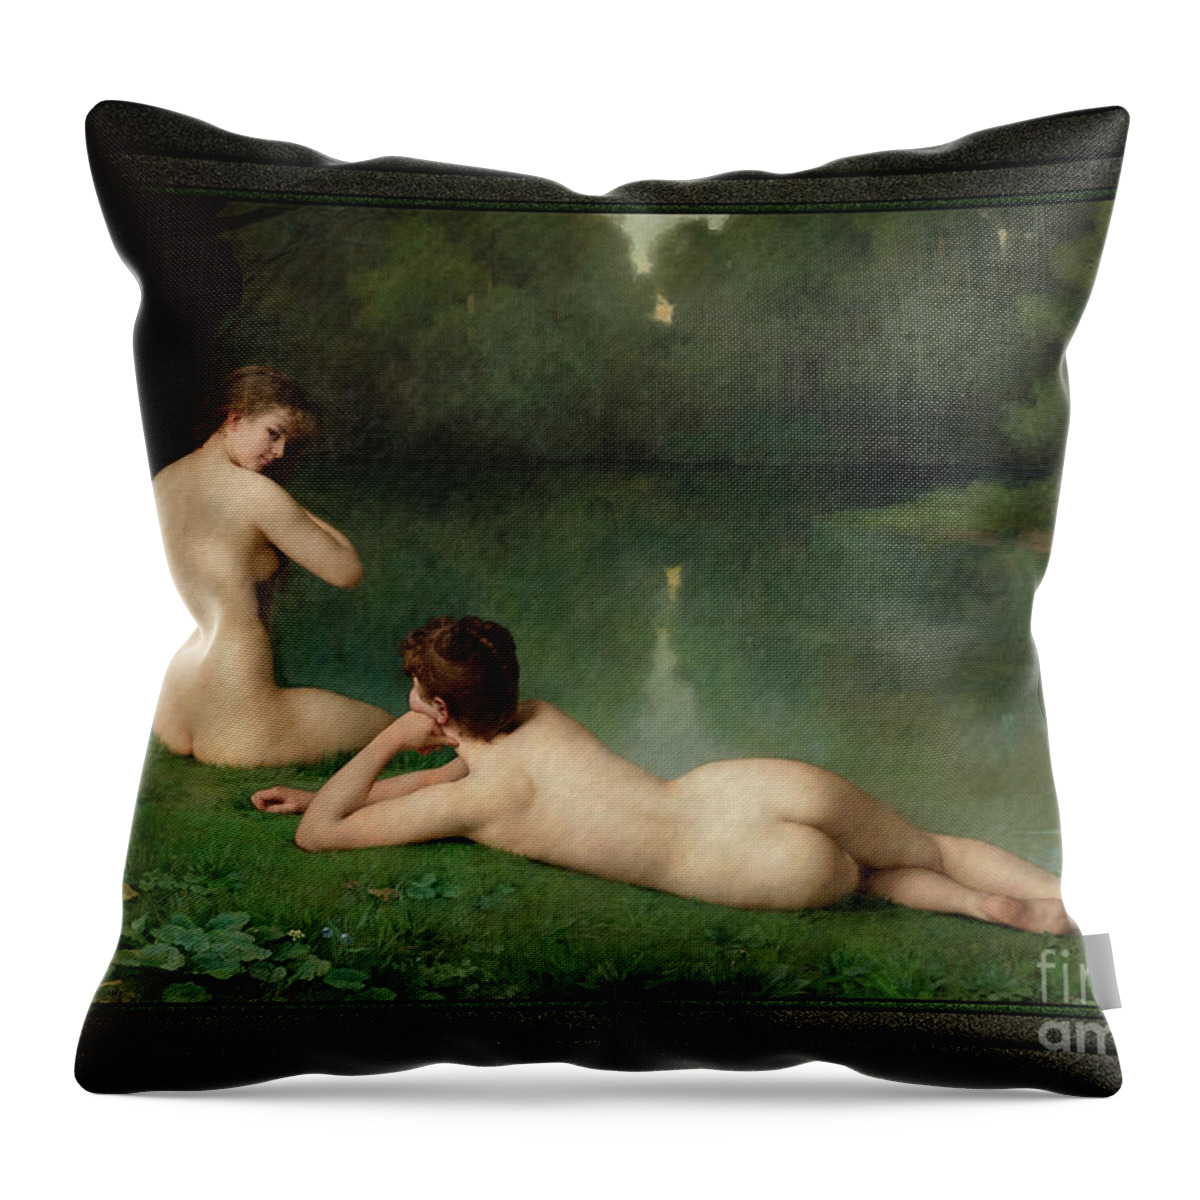 At The Waters Edge Throw Pillow featuring the painting At the Water's Edge by Emmanuel Benner Old Masters Classical Reproduction by Rolando Burbon